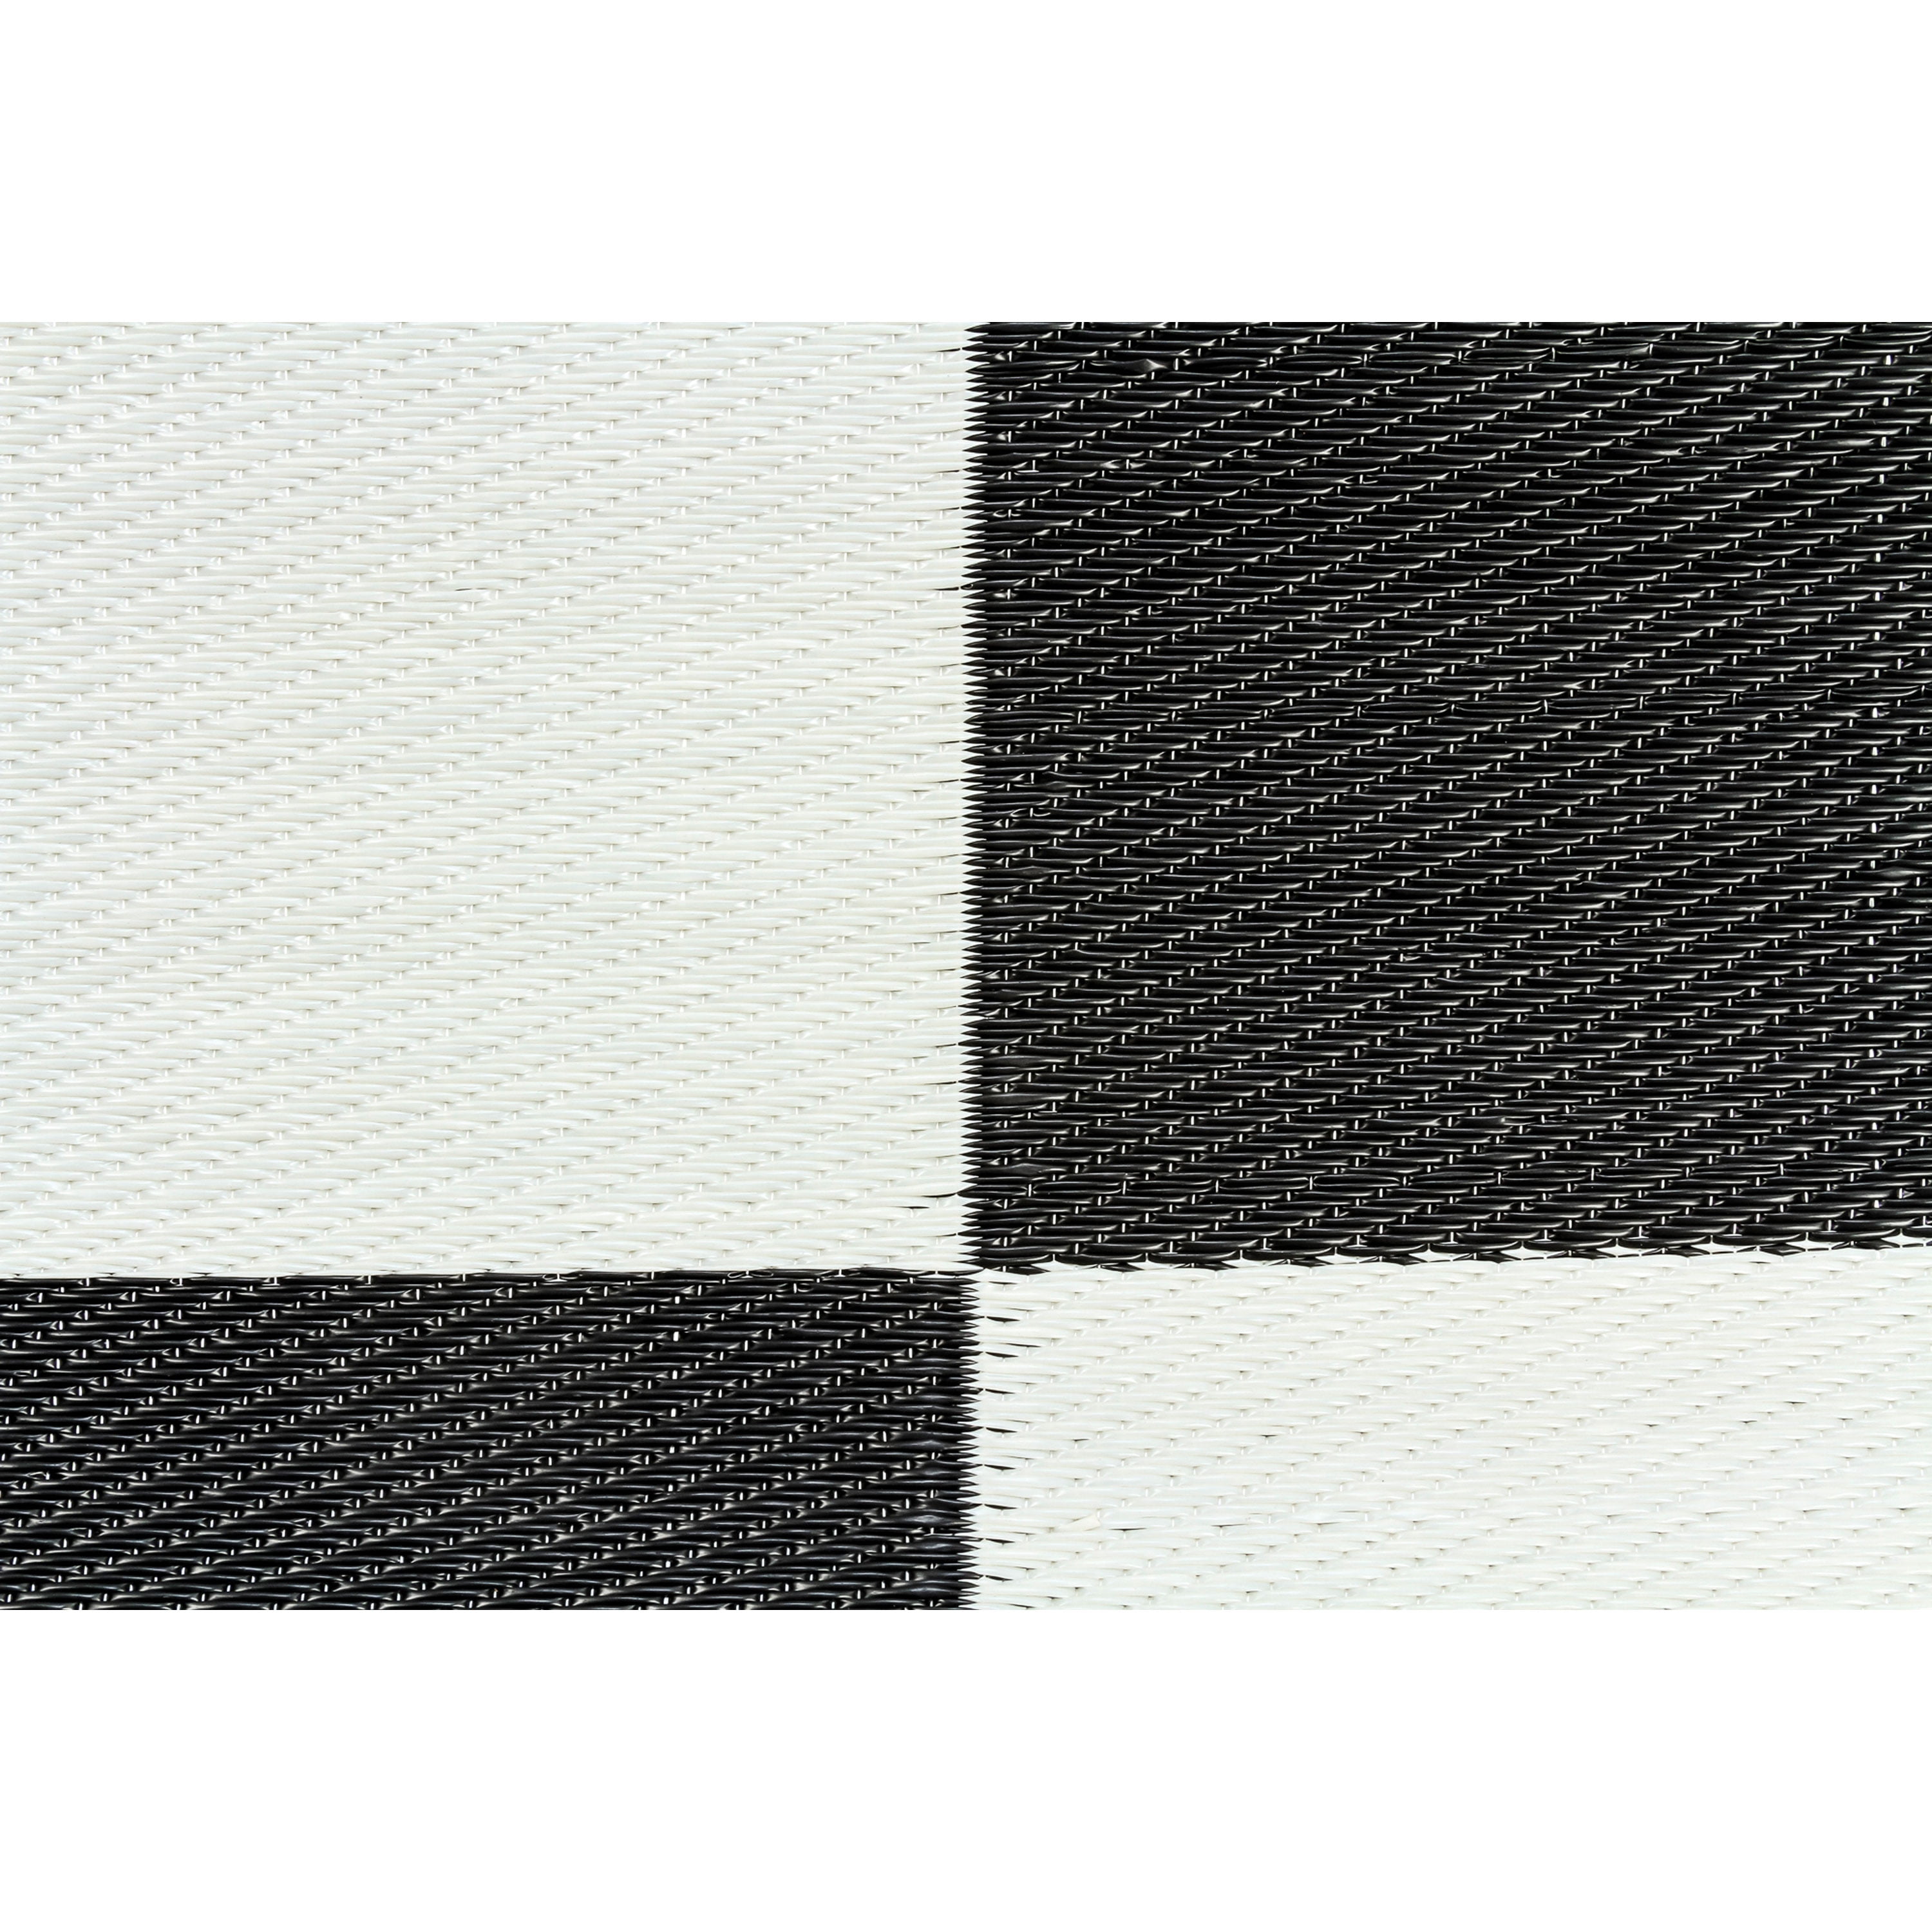 Camping for RV Patio Carry Bag and Rug Stakes Included 9 x 12 Black and White Weather Resistant Basics Outdoor Mat